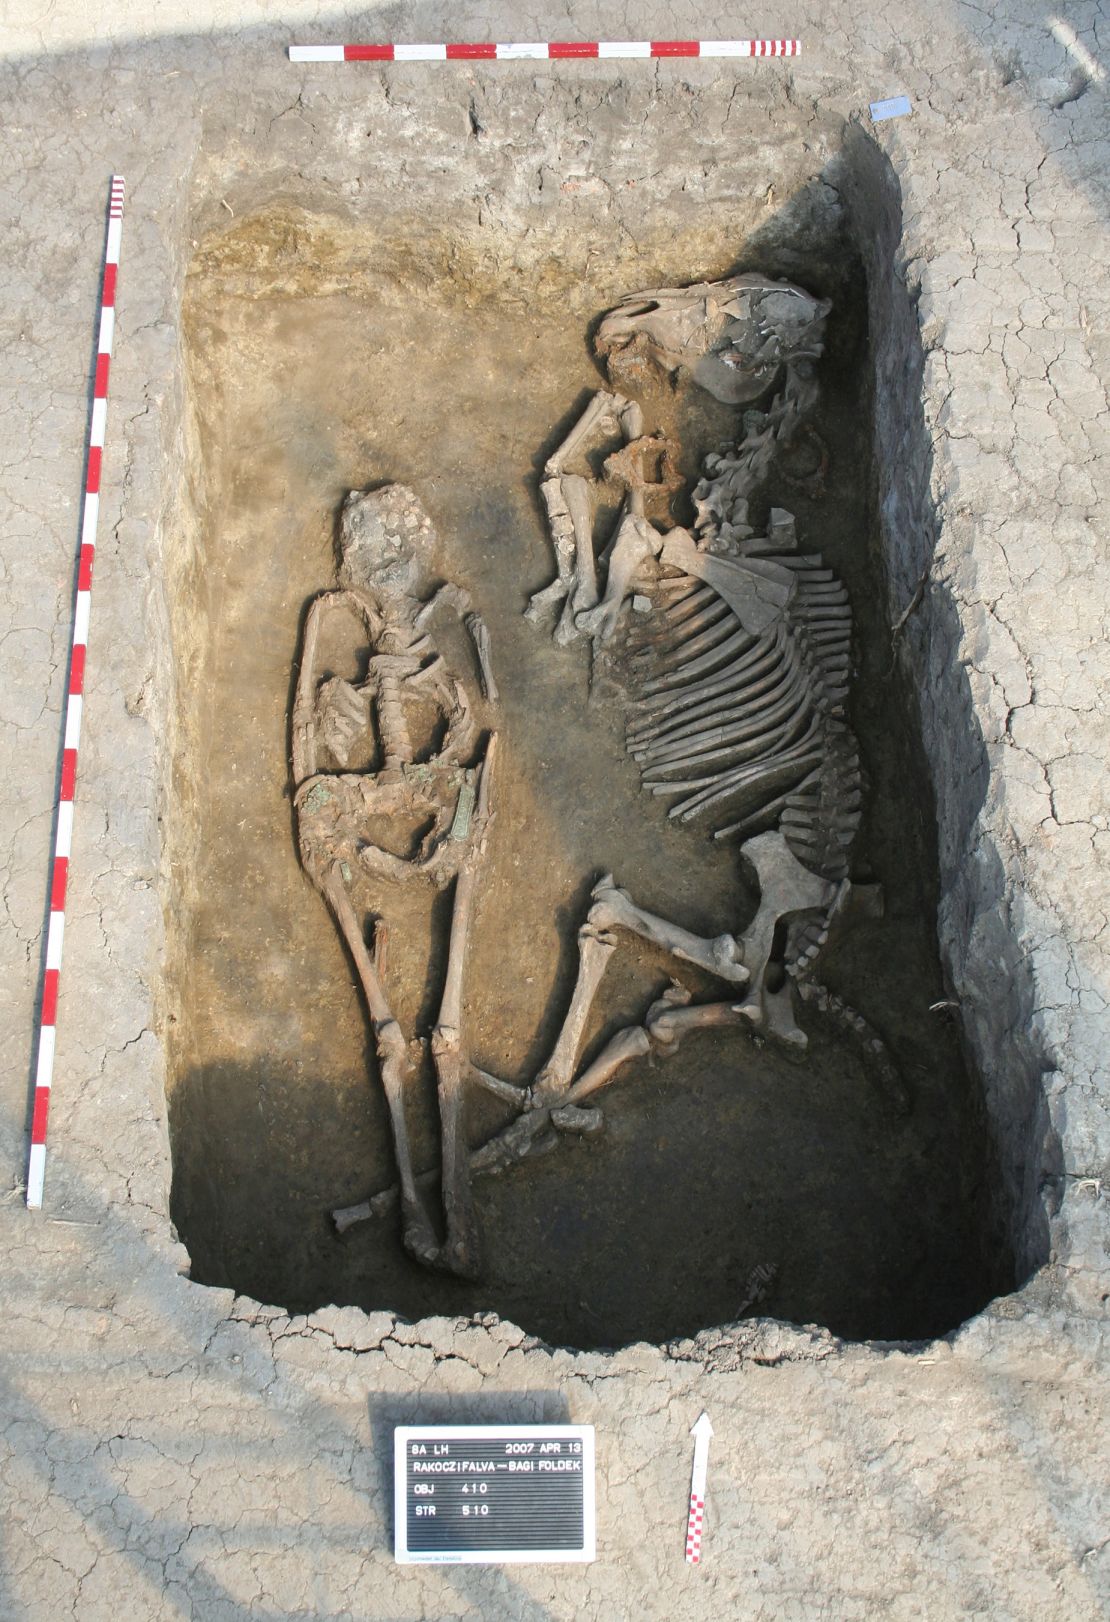 A male who died at a young age was buried with a horse in the eighth century at the Rákóczifalva cemetery.